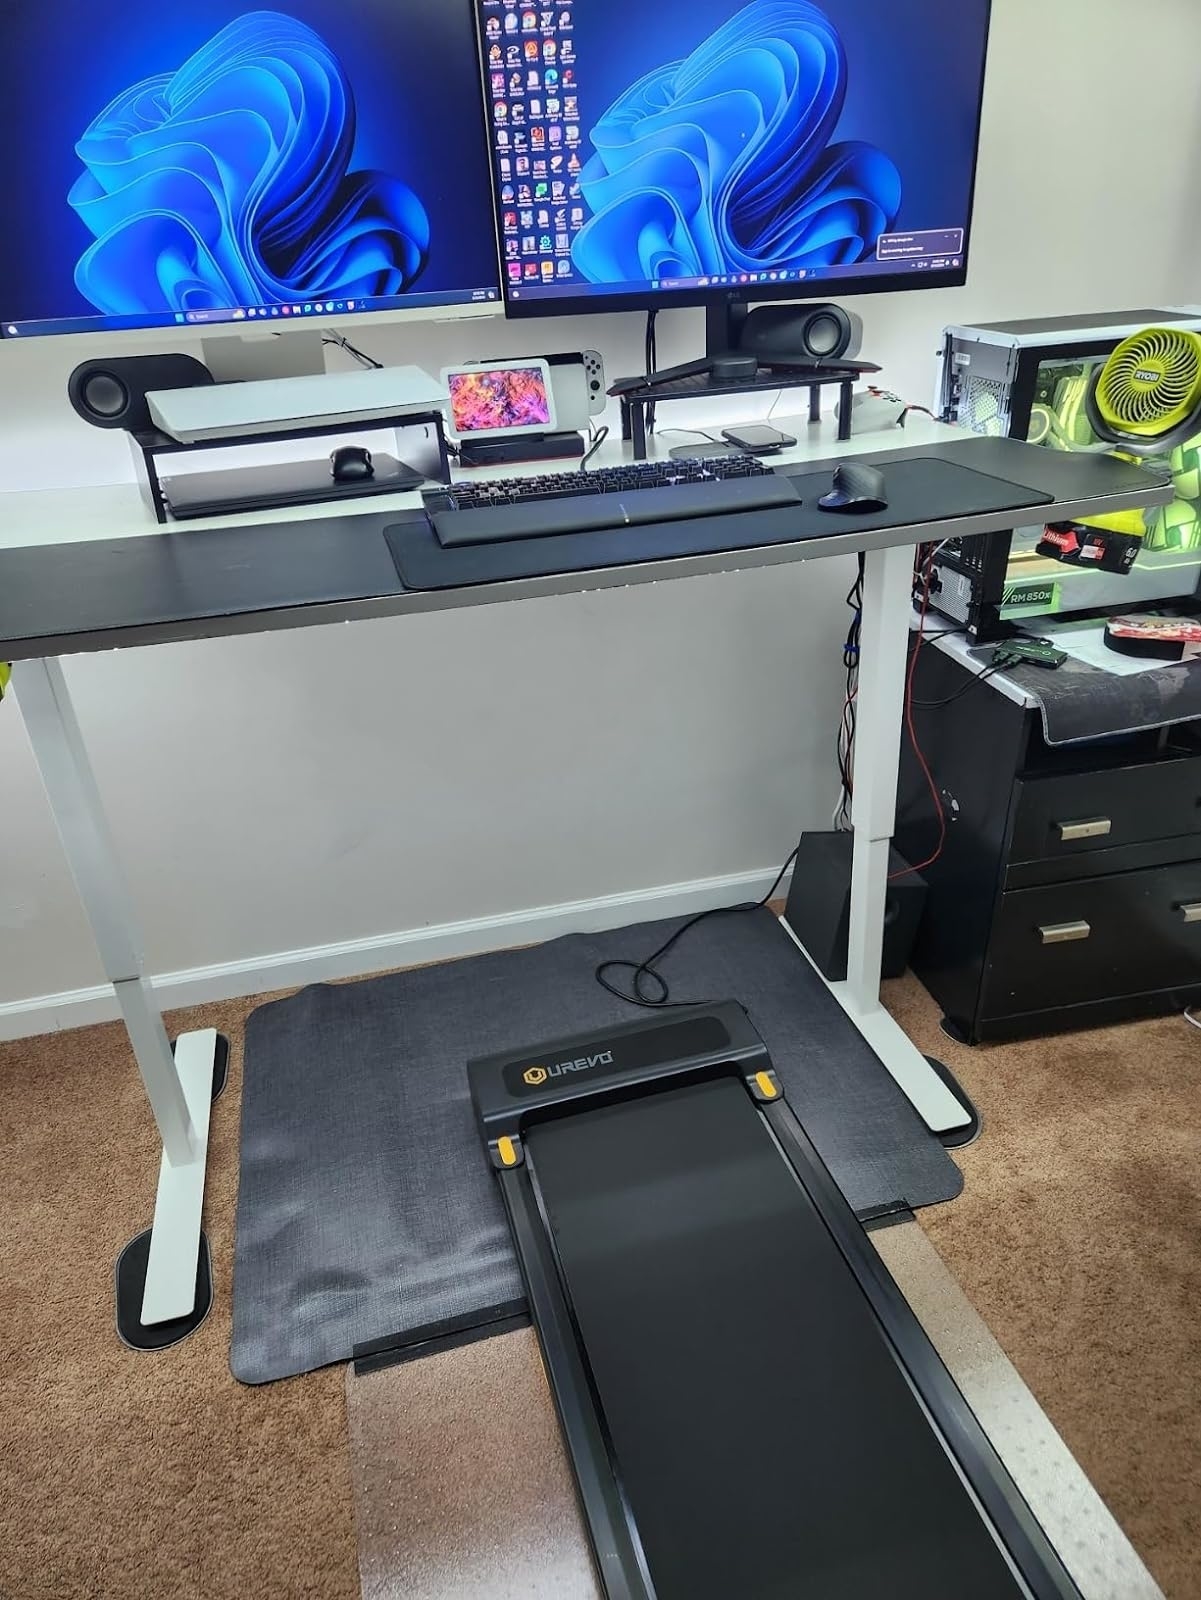 Home office setup with a standing desk, dual monitors, and treadmill set up underneath